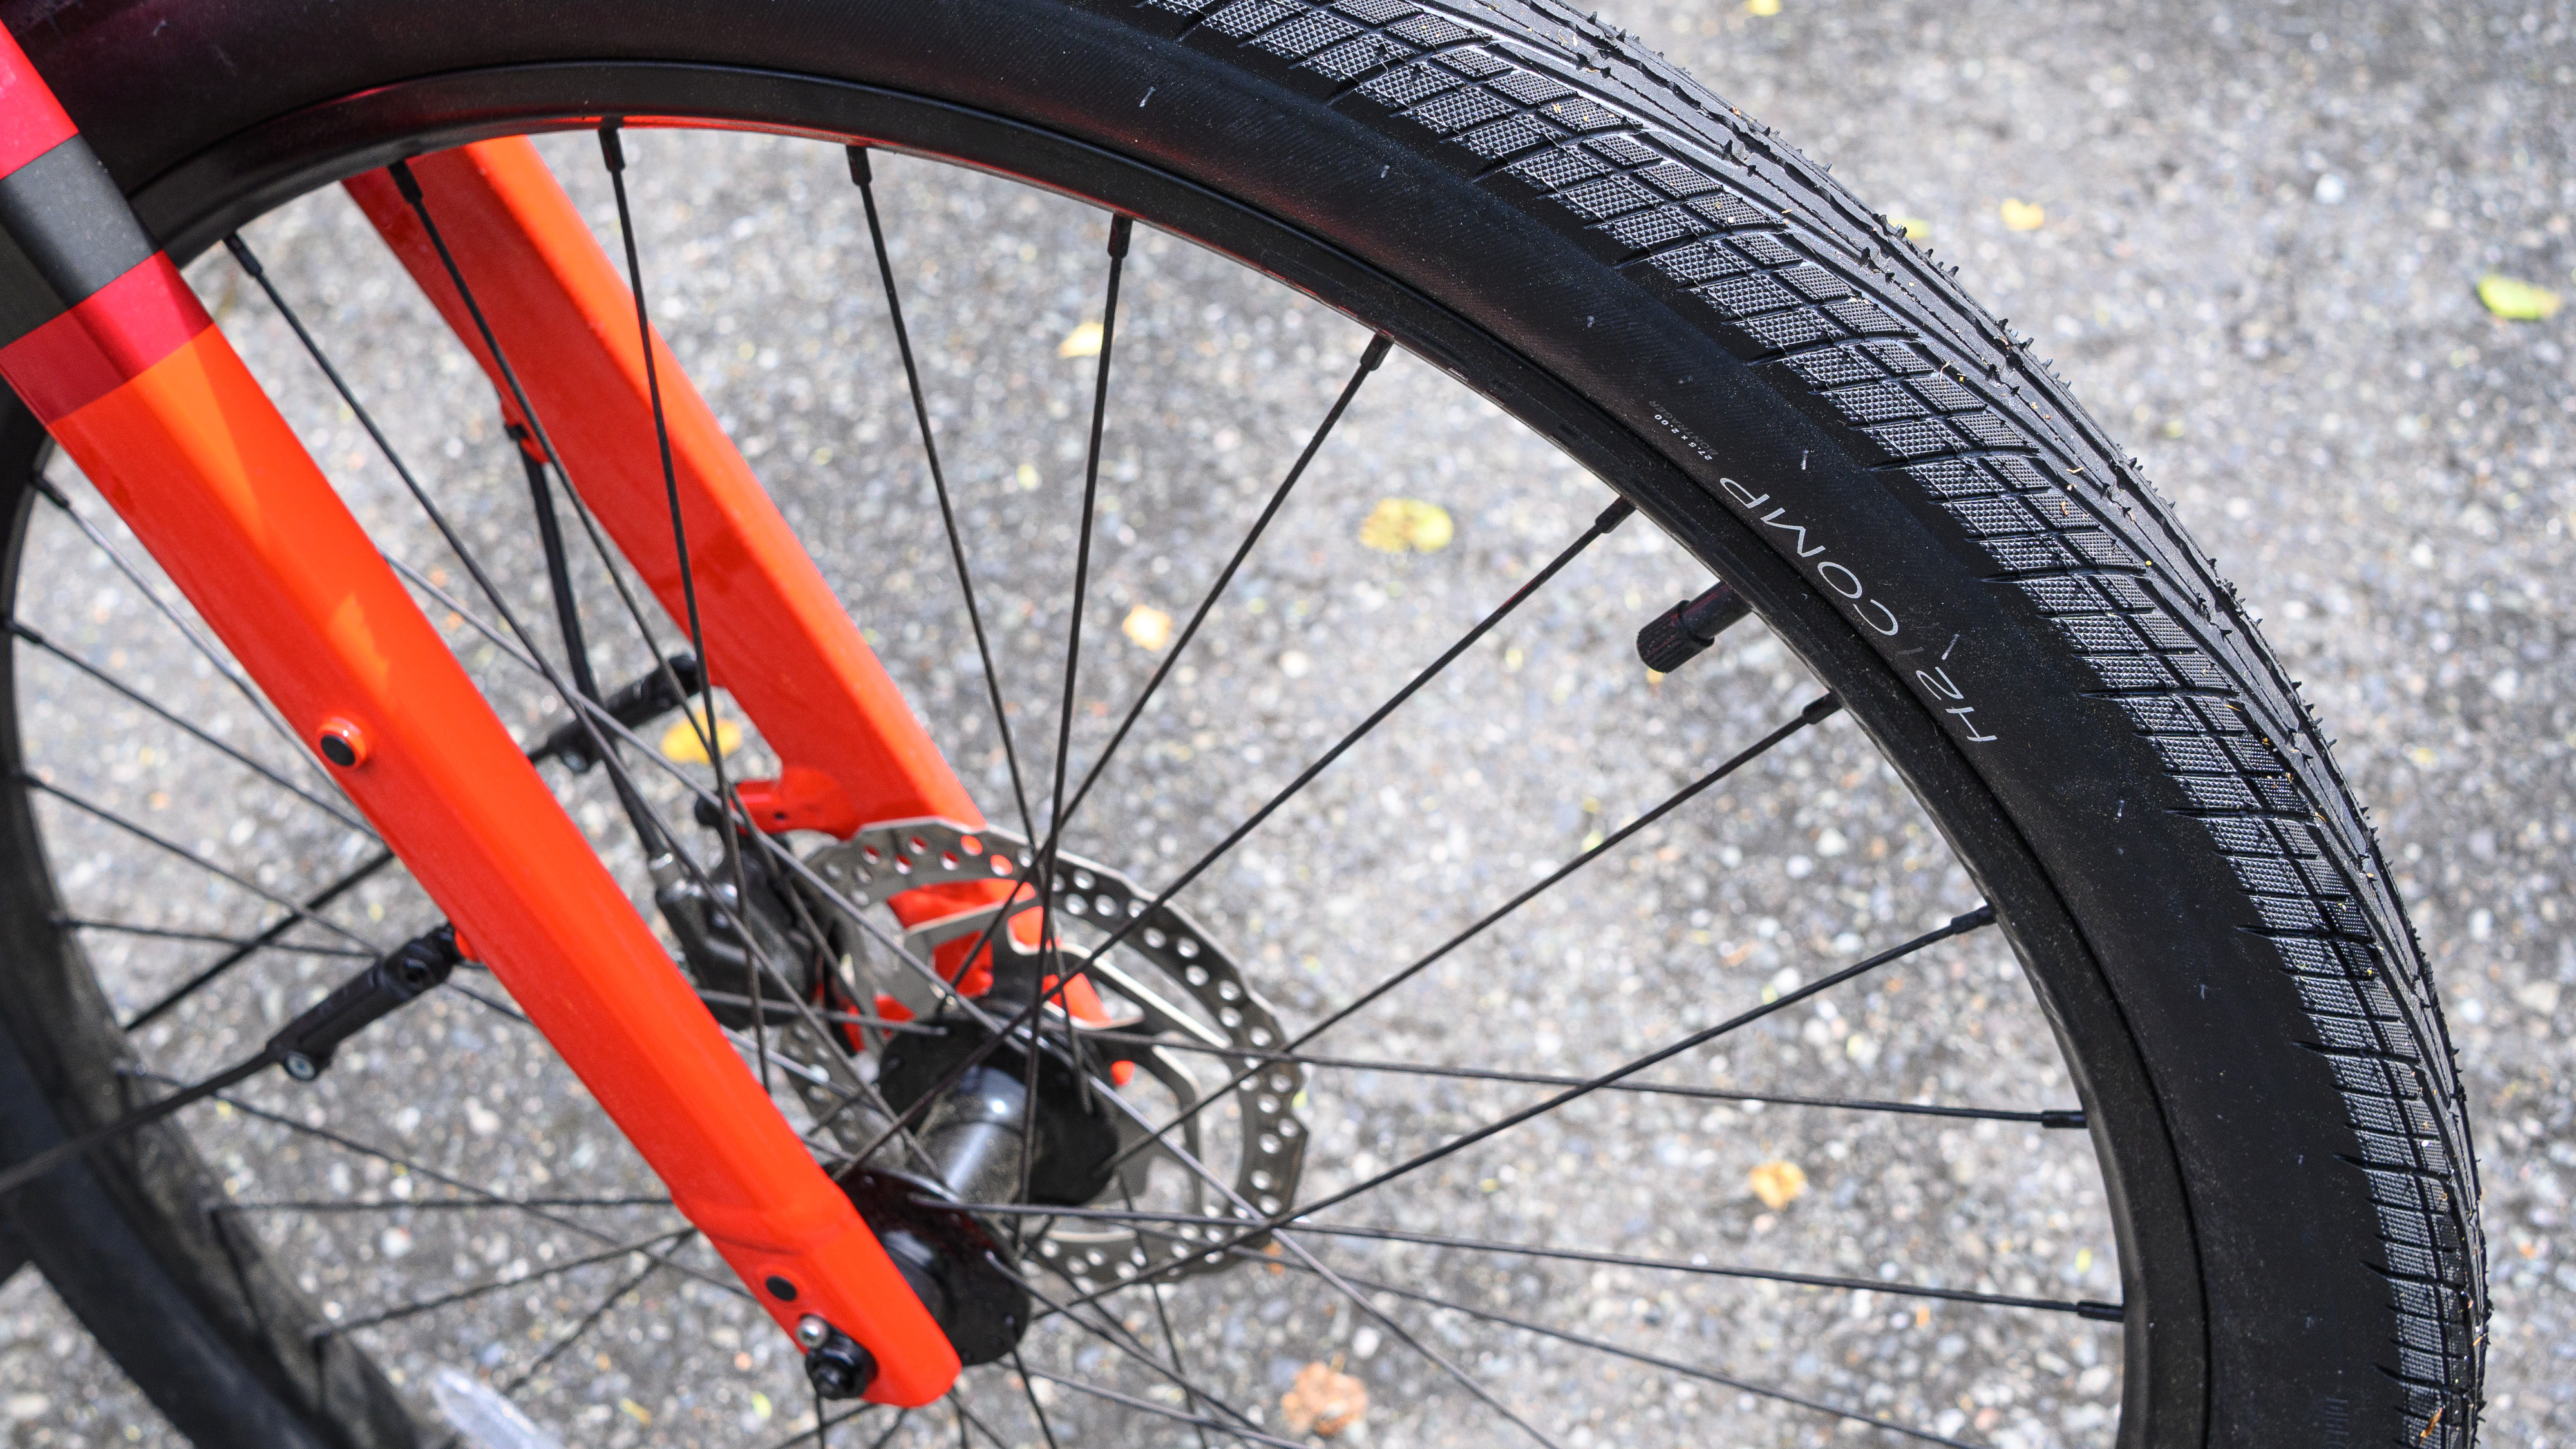 A close-up view of the tires and wheels on the Trek Verve+ 1 ebike.